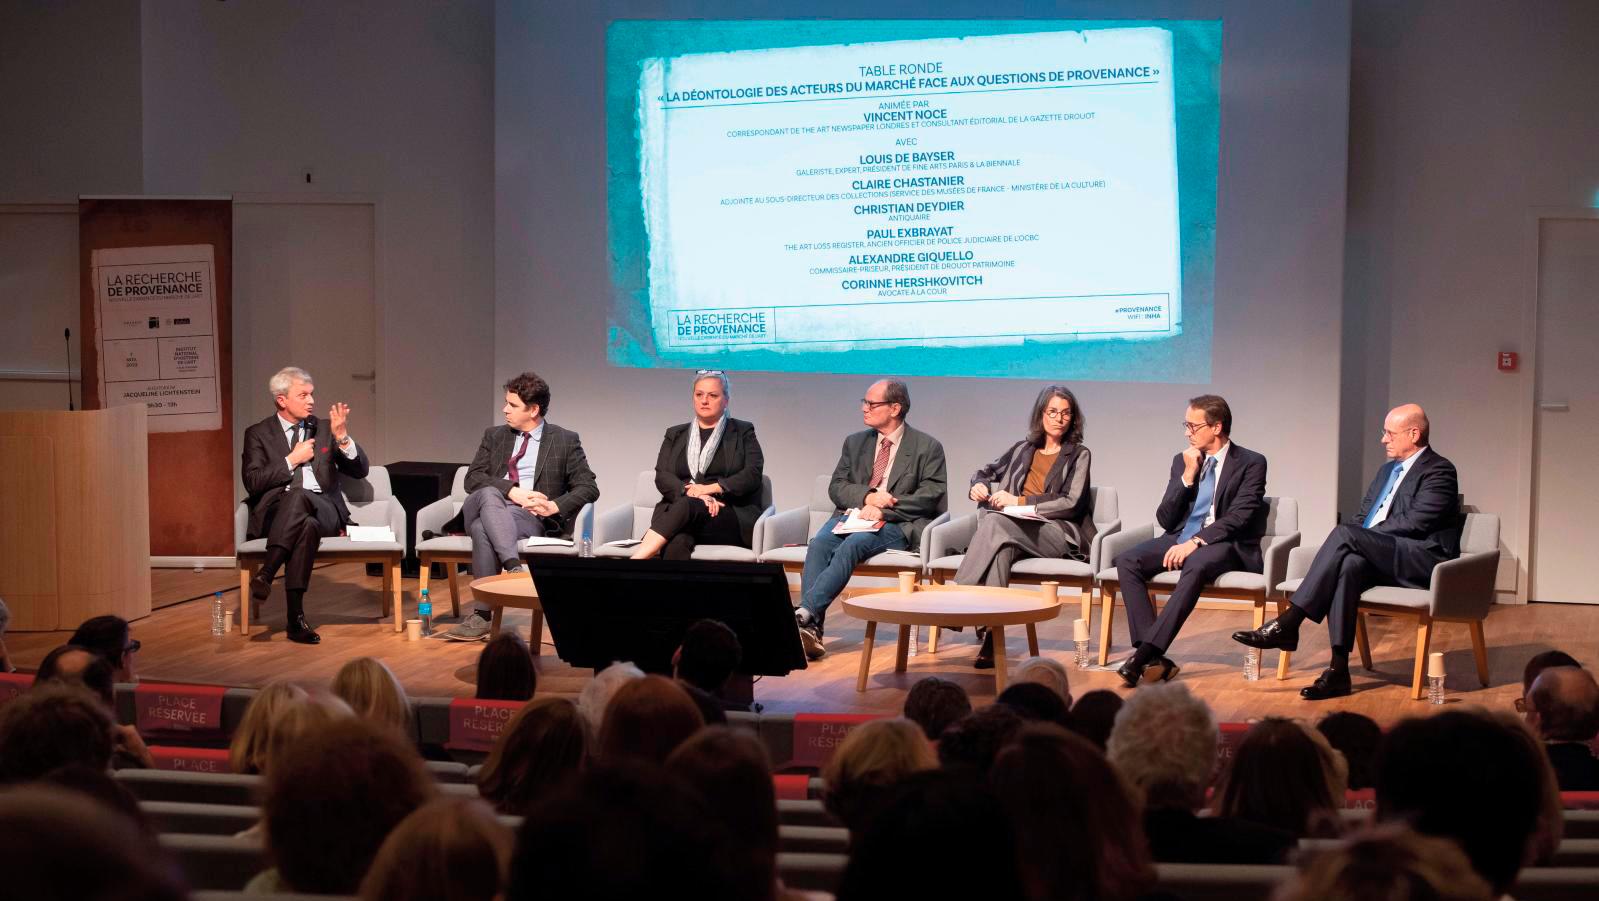 For Alexandre Giquello, president of Drouot Patrimoine, "we need to create virtuous... Report: What Has Emerged From the Latest Symposium on Provenance Research? 